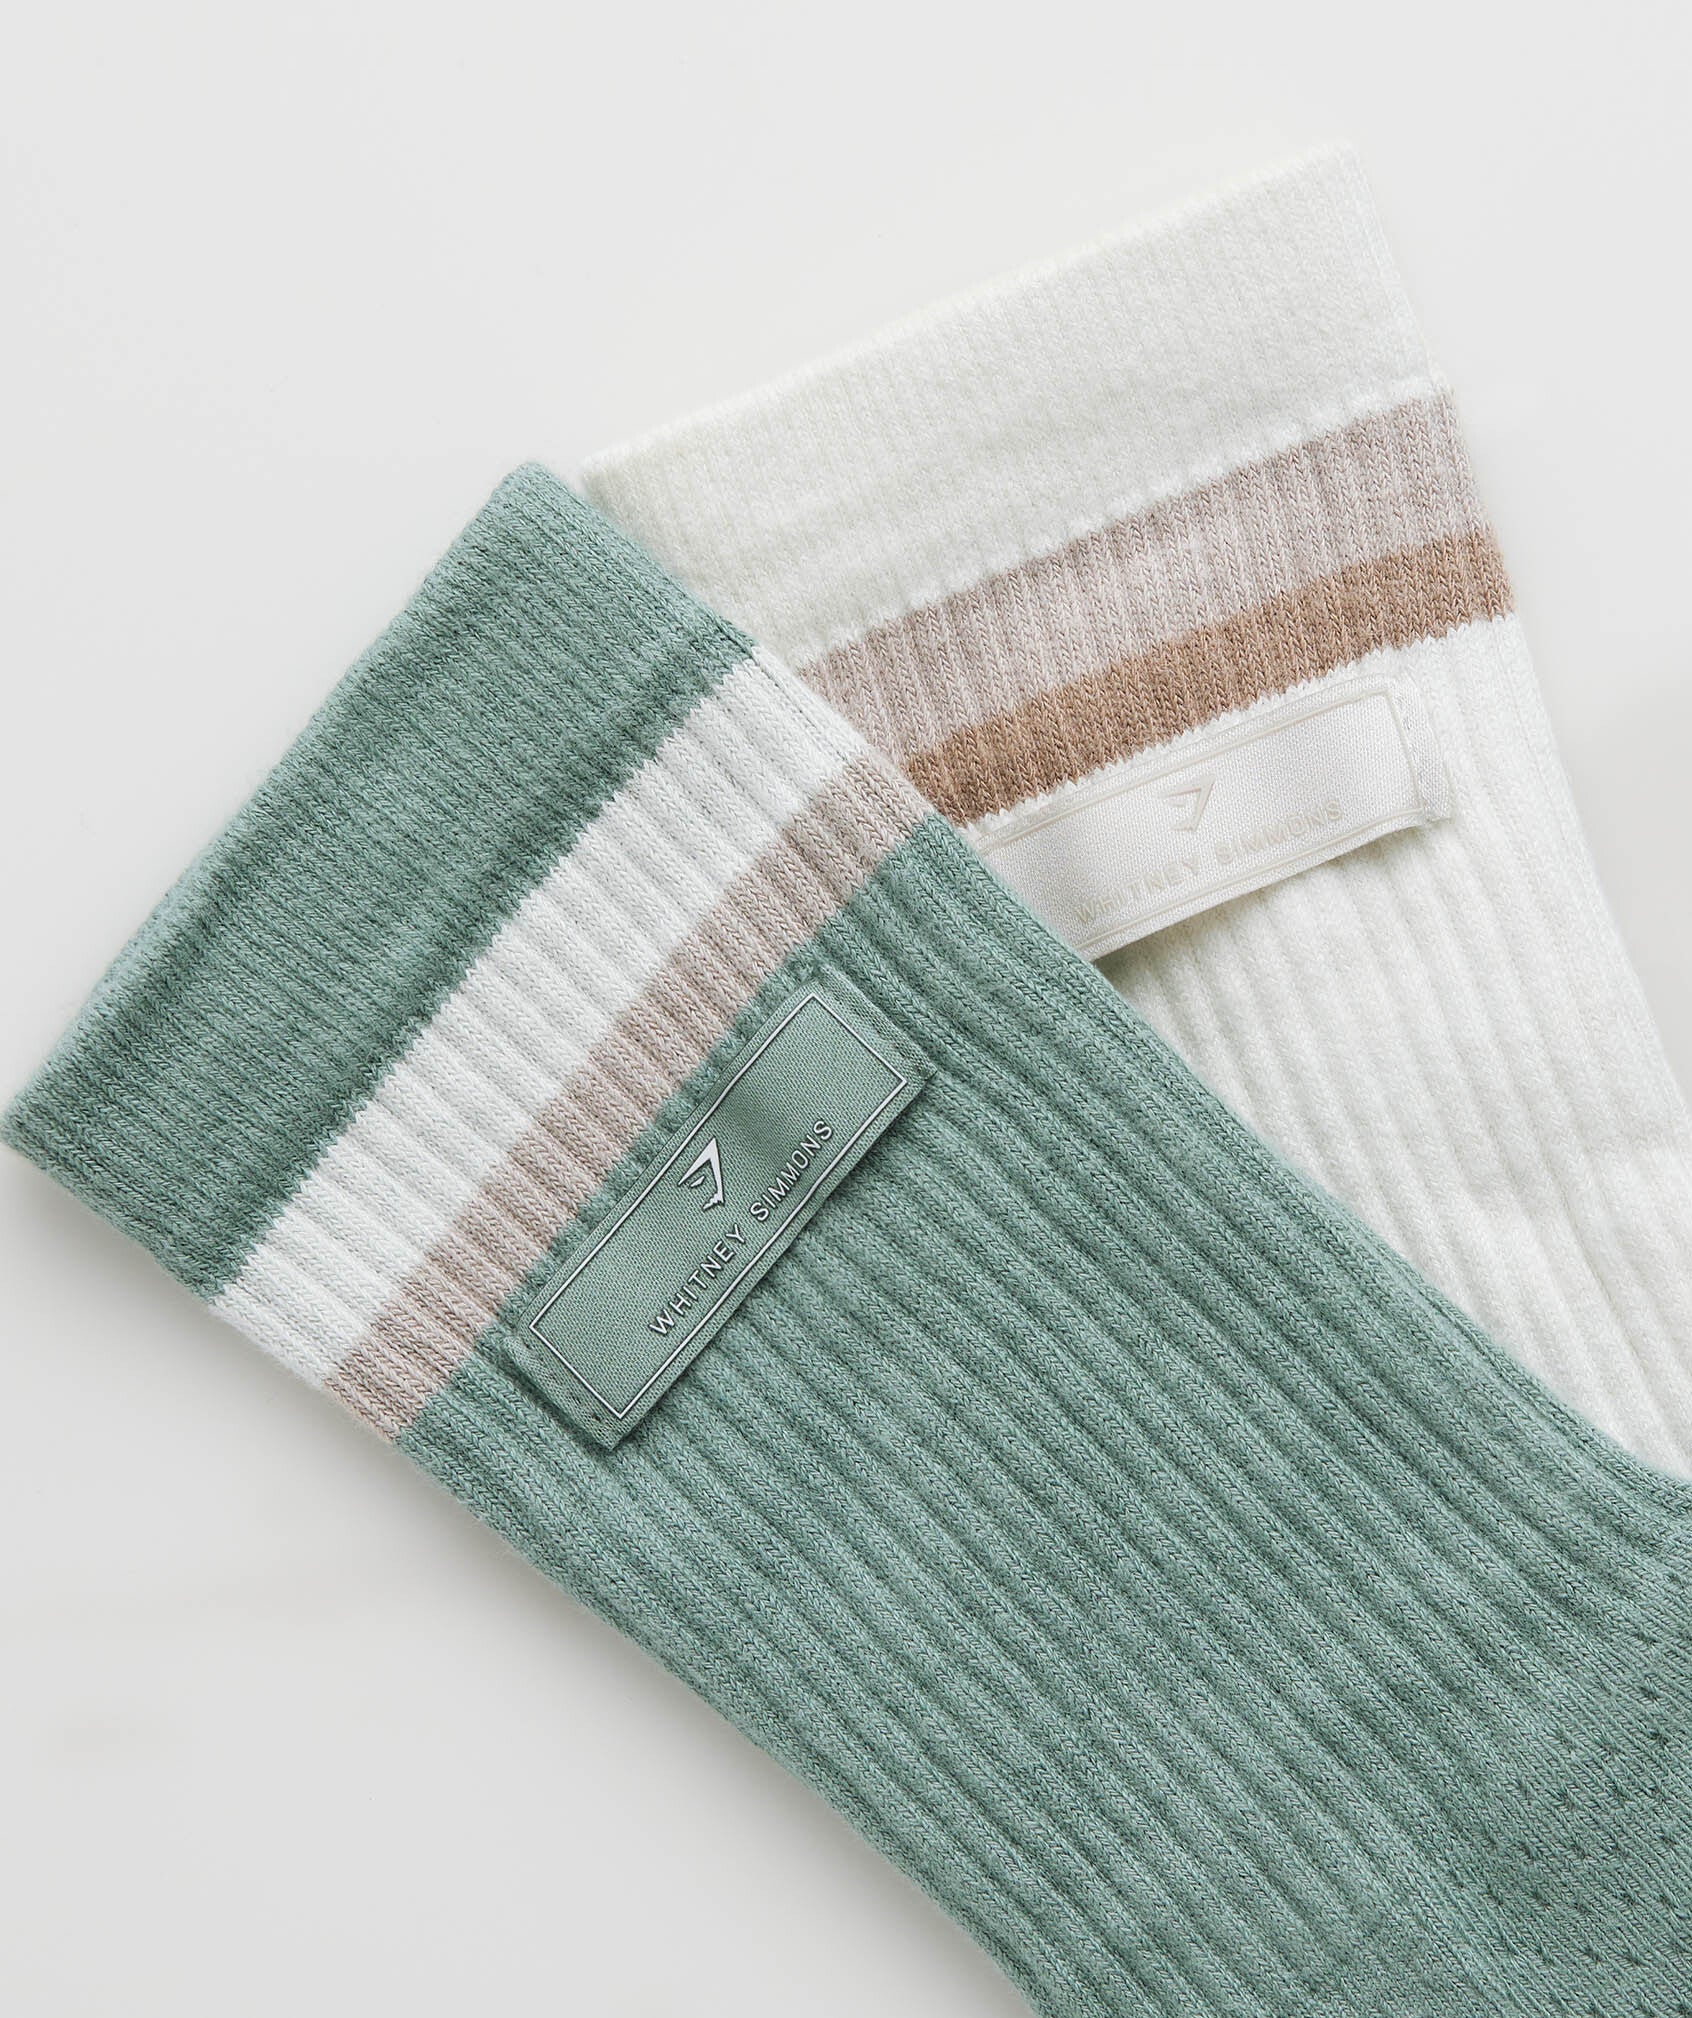 Whitney Crew Socks in Skylight White/Cozy Grey/Cement Brown/Leaf Green - view 2